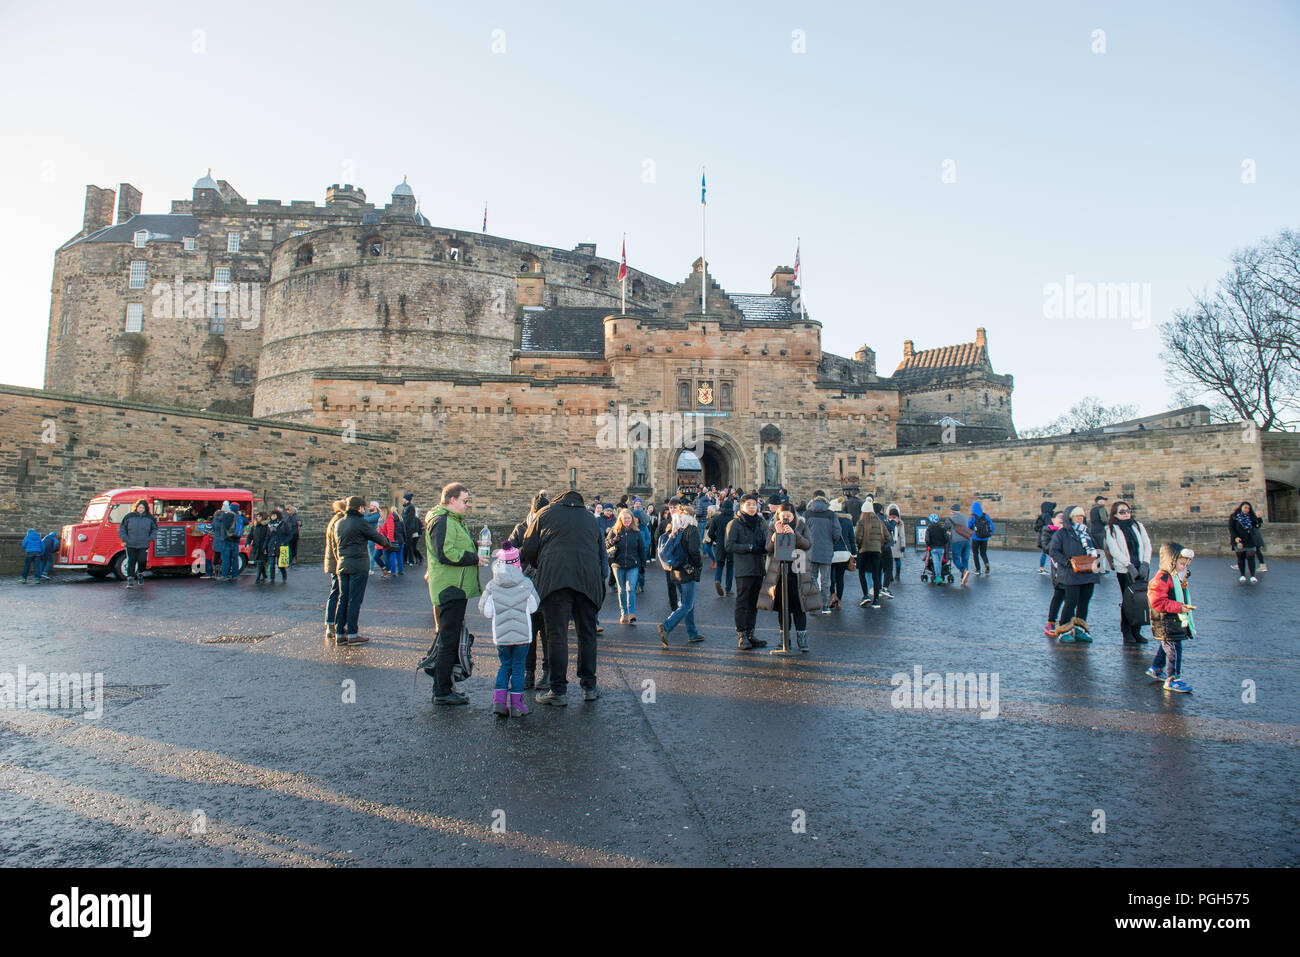 General shots of tourists at edinburgh castle esplanade for story on visitor numbers, Tourism Stock Photo